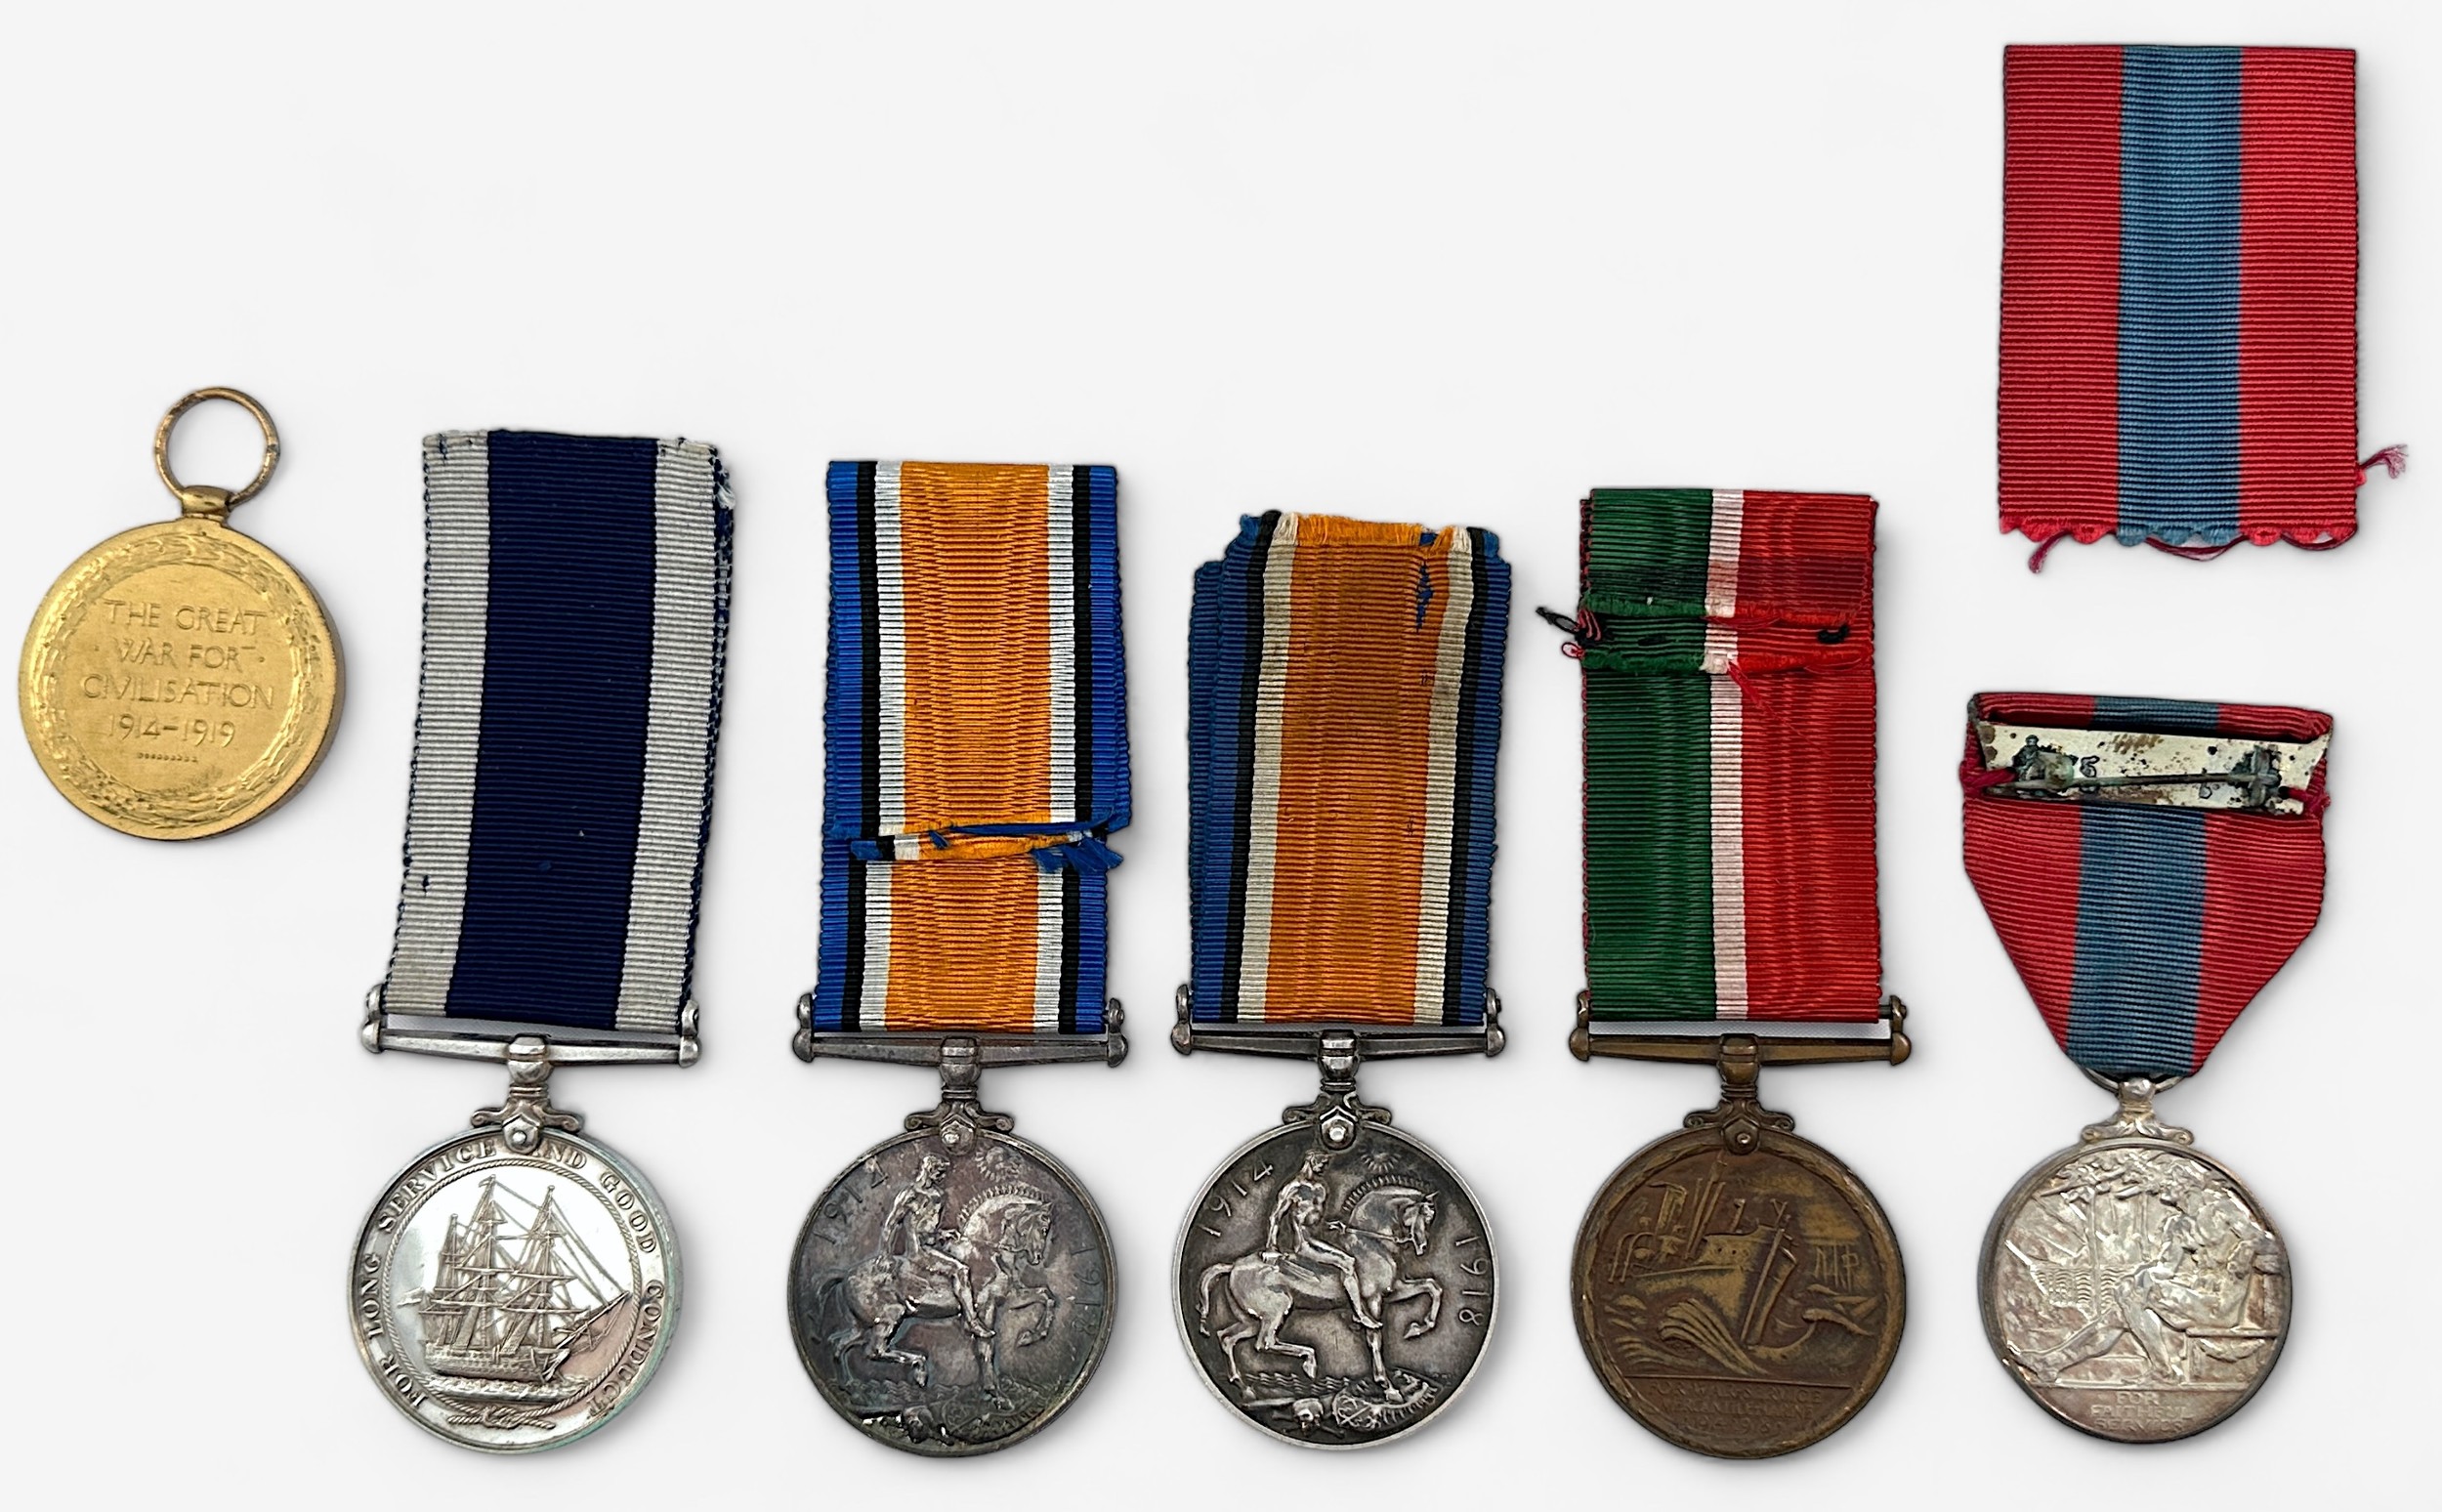 WW1 War medal to Capt A.H. Dickinson, A WW1 War Medal and Mercantile Marine War Medal pair to - Image 2 of 2